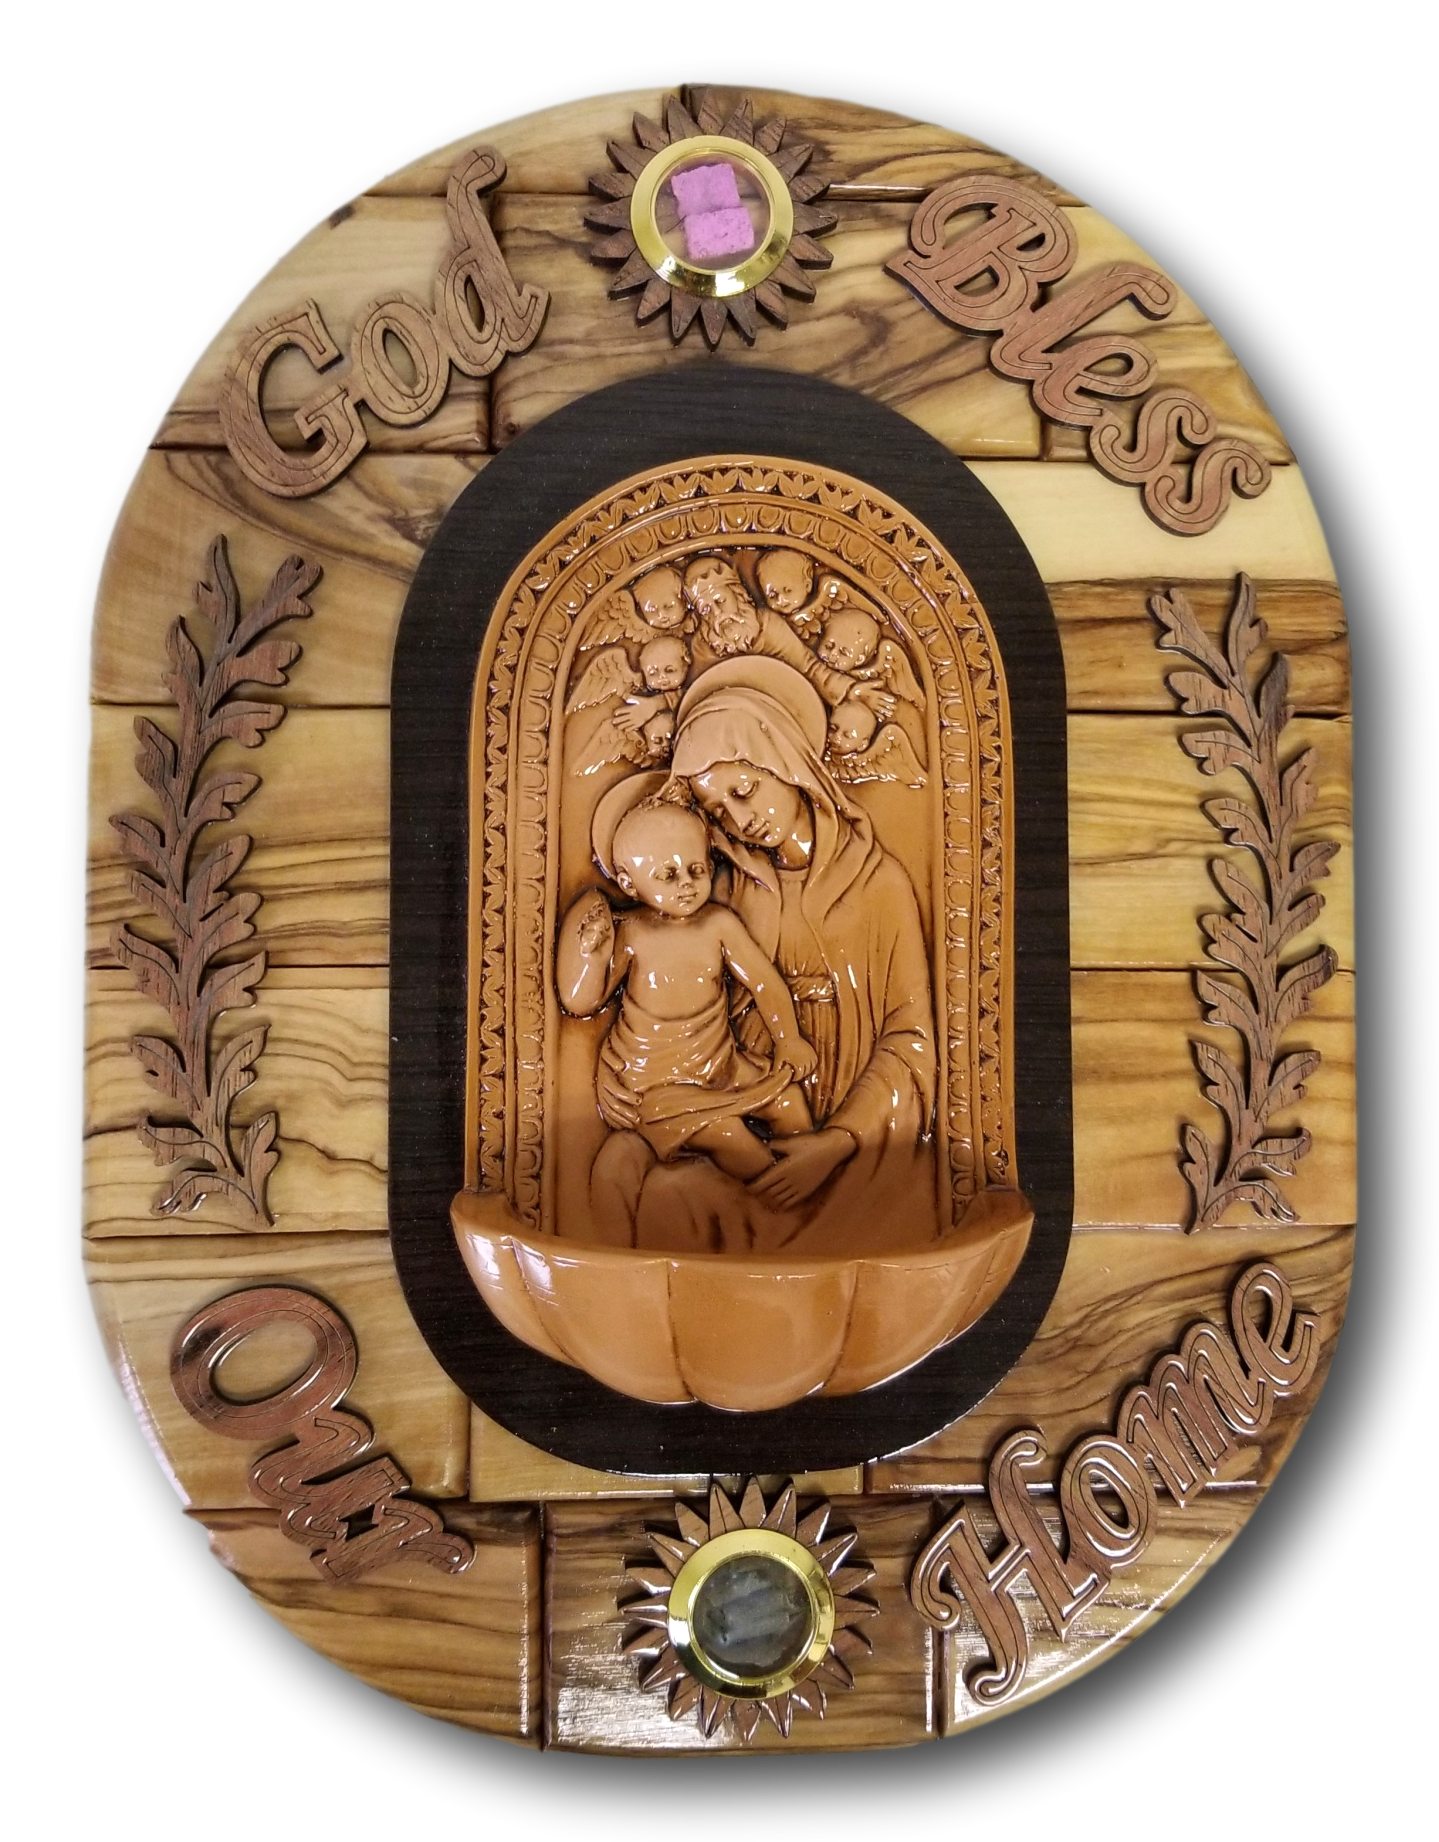 MOTHER MARY AND BABY JESUS PLAQUE WITH PORCELAIN FIGURES, AND A HOLY ITEM